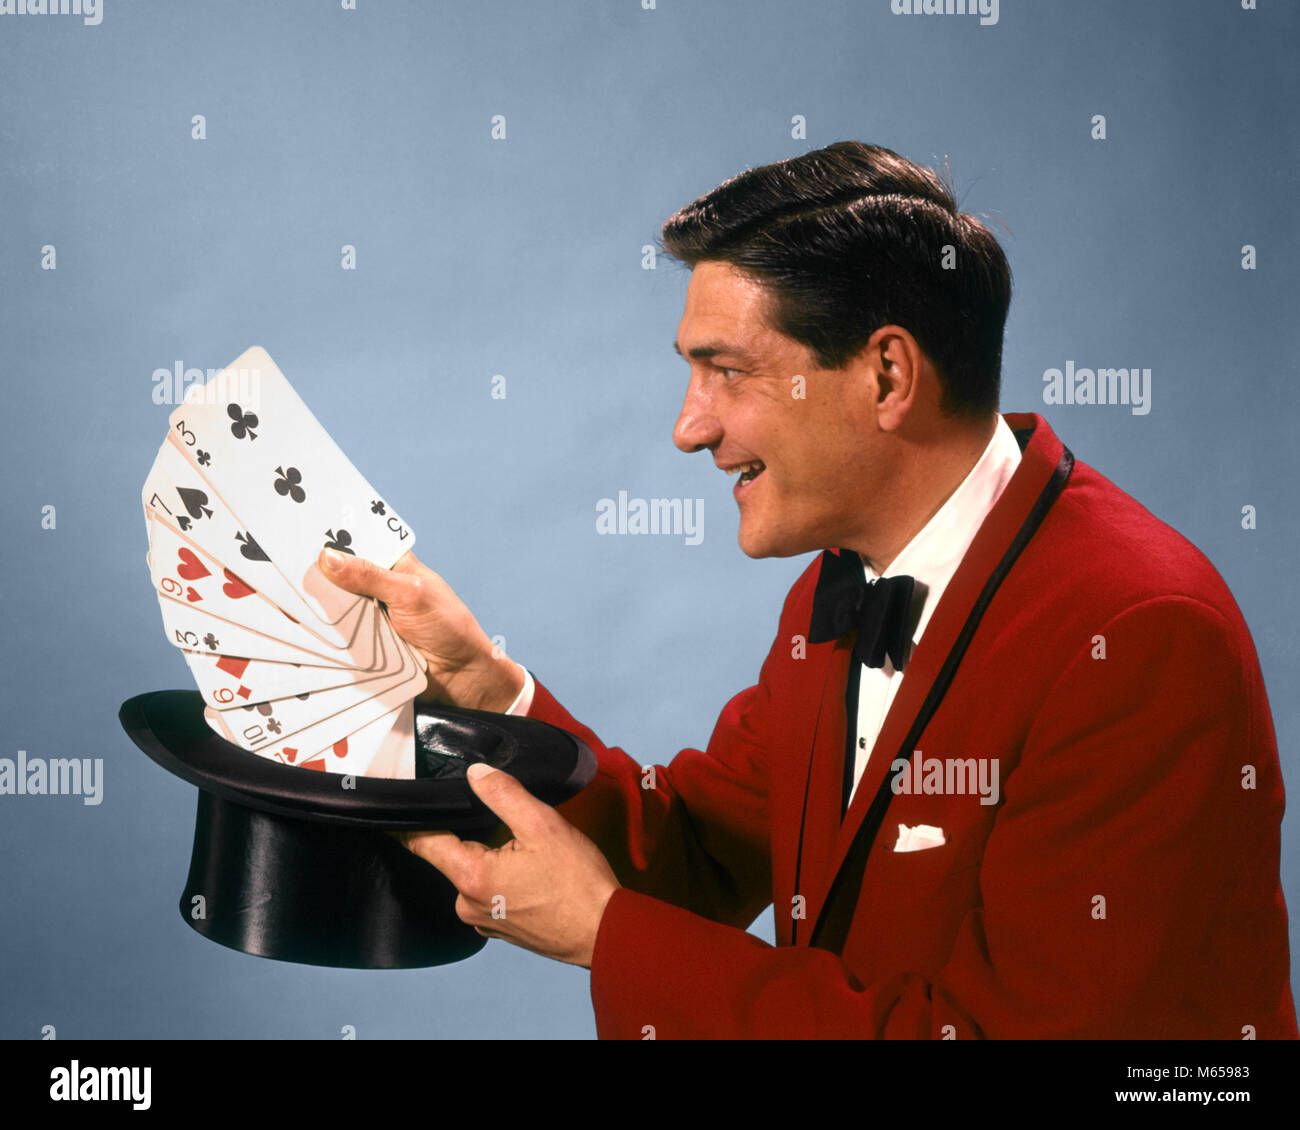 1960s 1970s MAN MAGICIAN RED SUIT BOW TIE PULLING OVERSIZE PLAYING CARDS OUT OF TOP HAT - kc2841 HAR001 HARS 30-35 YEARS 35-40 YEARS MAGICIANS PEOPLE STORY ILLUSION MANUAL PERFORMER CHARACTERS EXCITEMENT OVERSIZE RED SUIT ENTERTAINER CONJURER SMALL GROUP OF OBJECTS BOW TIE MAGICAL LEGERDEMAIN MALES MID-ADULT MID-ADULT MAN PLAYING CARDS TOP HAT CAUCASIAN ETHNICITY DECK OF CARDS HAND OF CARDS OCCUPATIONS OLD FASHIONED PERSONS PRESTIDIGITATION SLEIGHT OF HAND Stock Photo